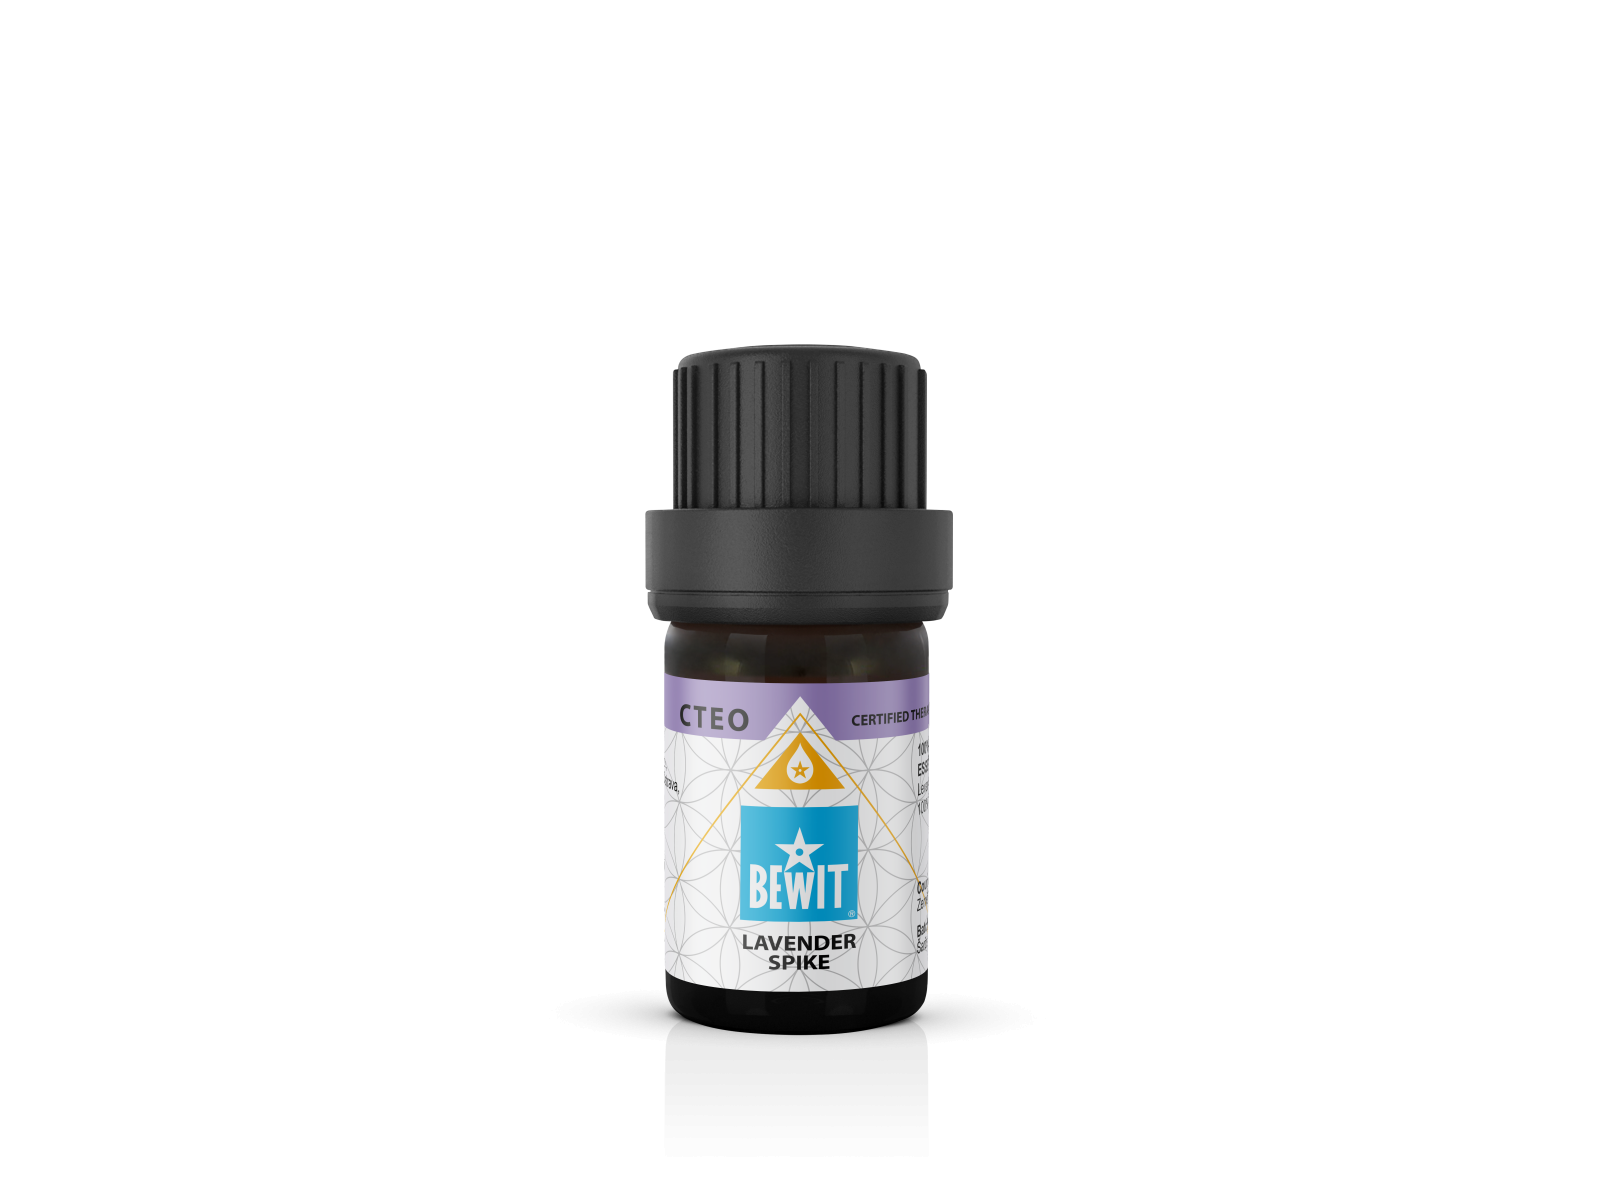 BEWIT Lavender Spike - 100% pure and natural CTEO® essential oil - 4